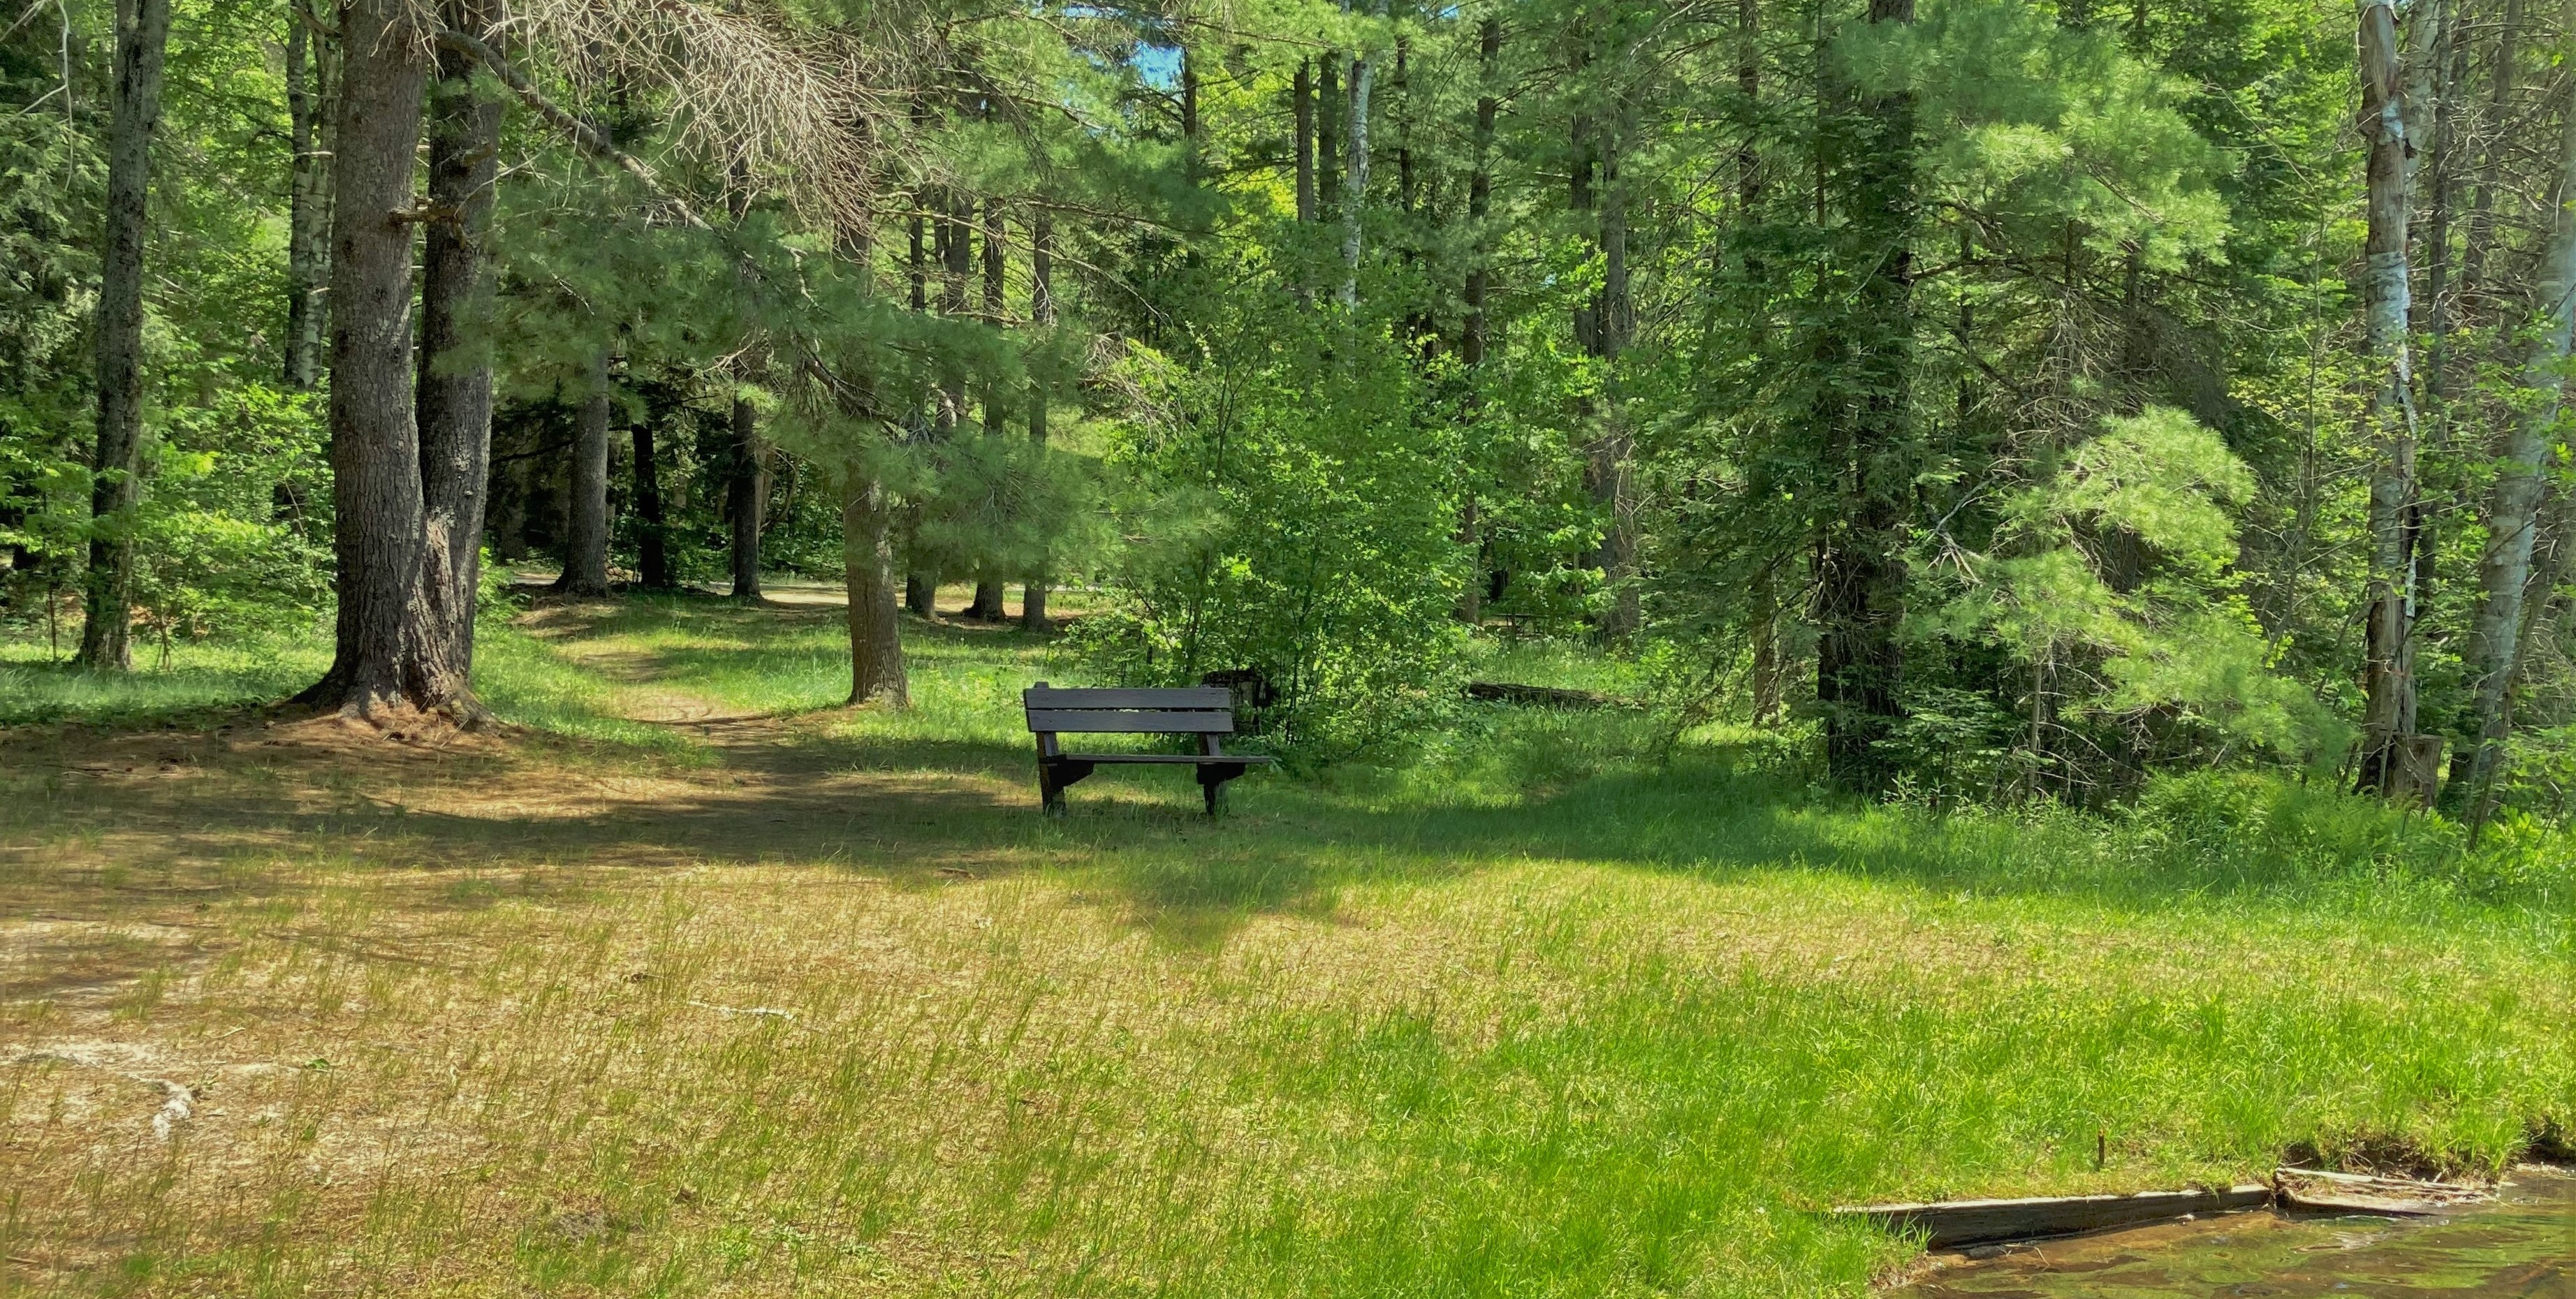 A bench in a green forest